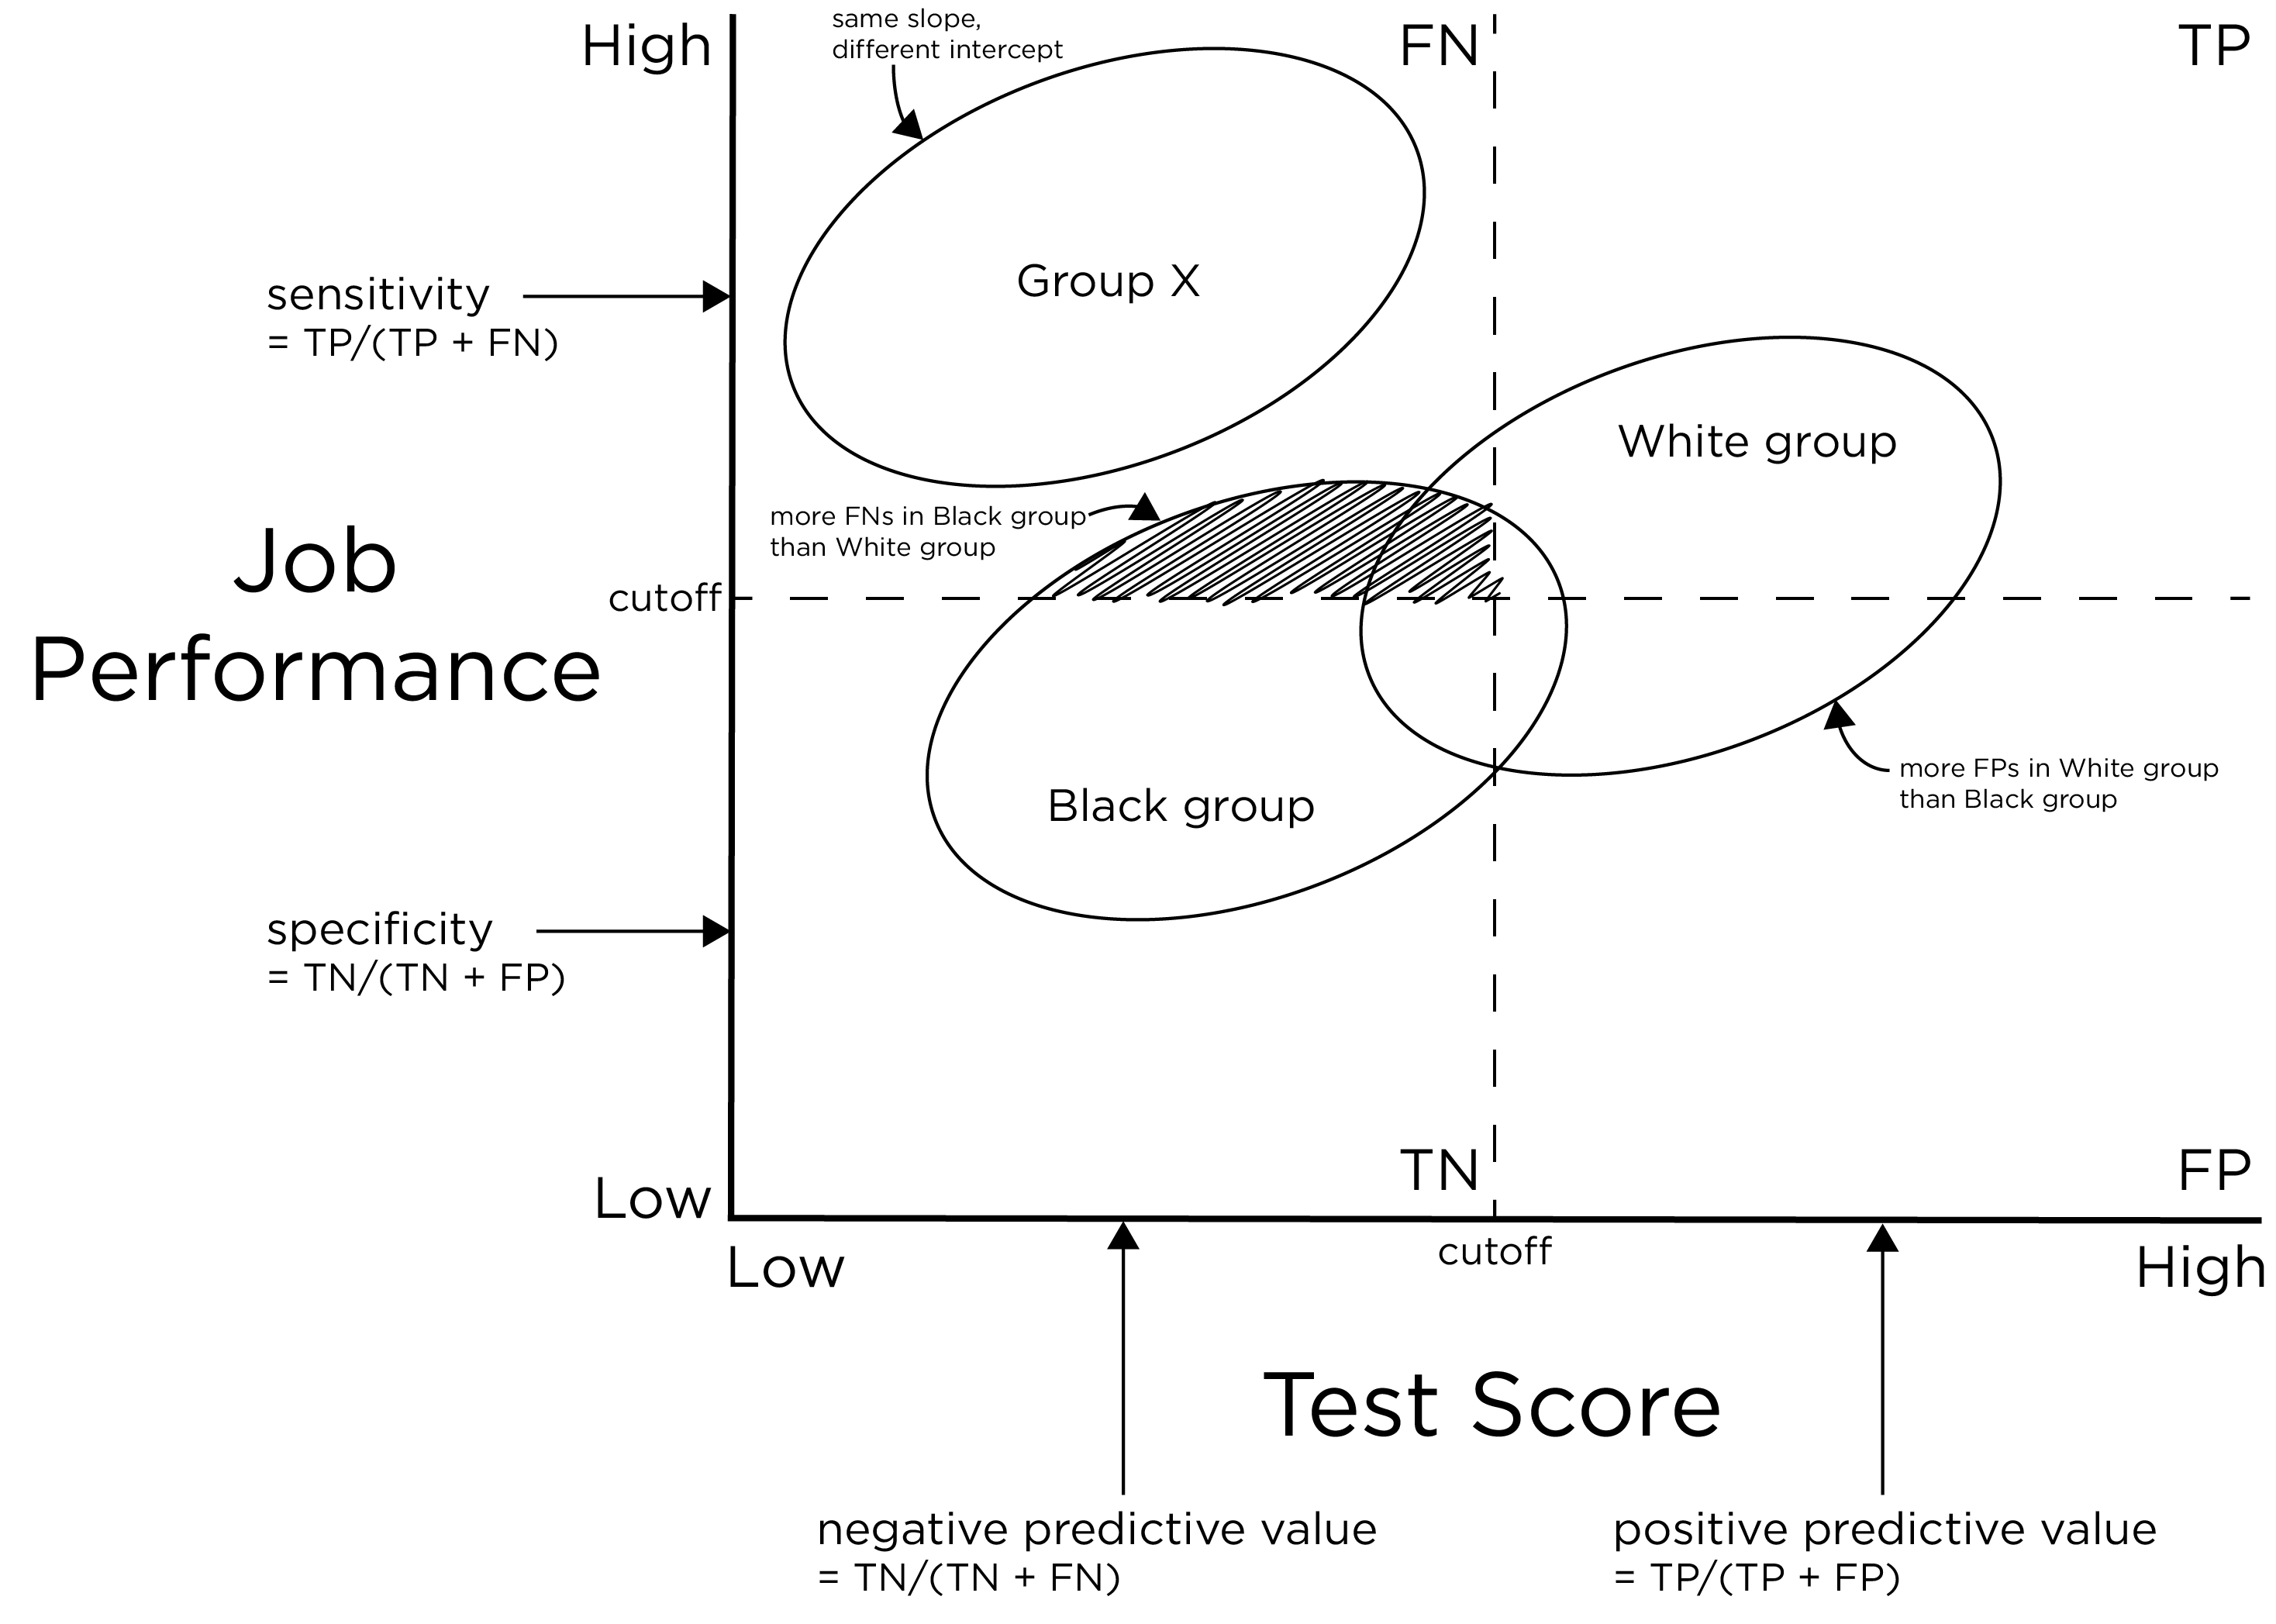 Potential Unfairness in Testing. The ovals represent the distributions of individuals’ performance both on a test and a job performance criterion. TP = true positive; TN = true negative; FP = false positive; FN = false negative. (Adapted from L. S. Gottfredson (1994), Figure 1, p. 958. Gottfredson, L. S. (1994). The science and politics of race-norming. American Psychologist, 49(11), 955–963. https://doi.org/10.1037/0003-066X.49.11.955)